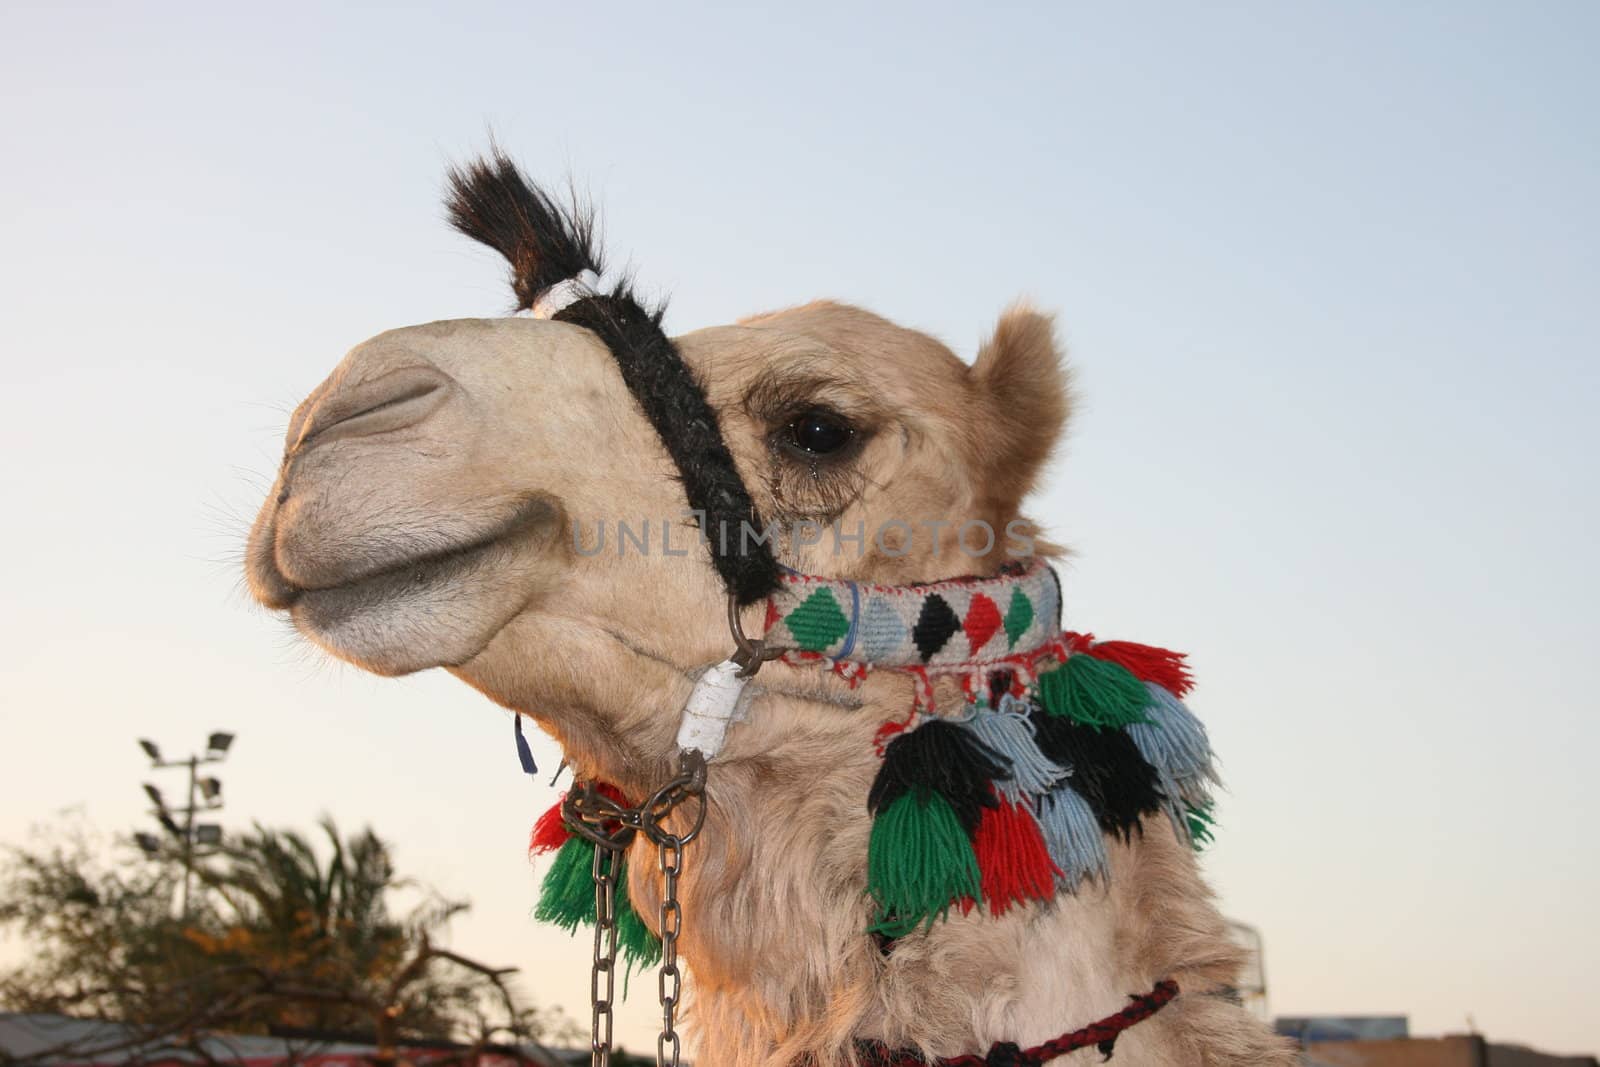 Jordanian camel with bedouin accessories, smiling and looking at the photographer with brown eyes by pingster